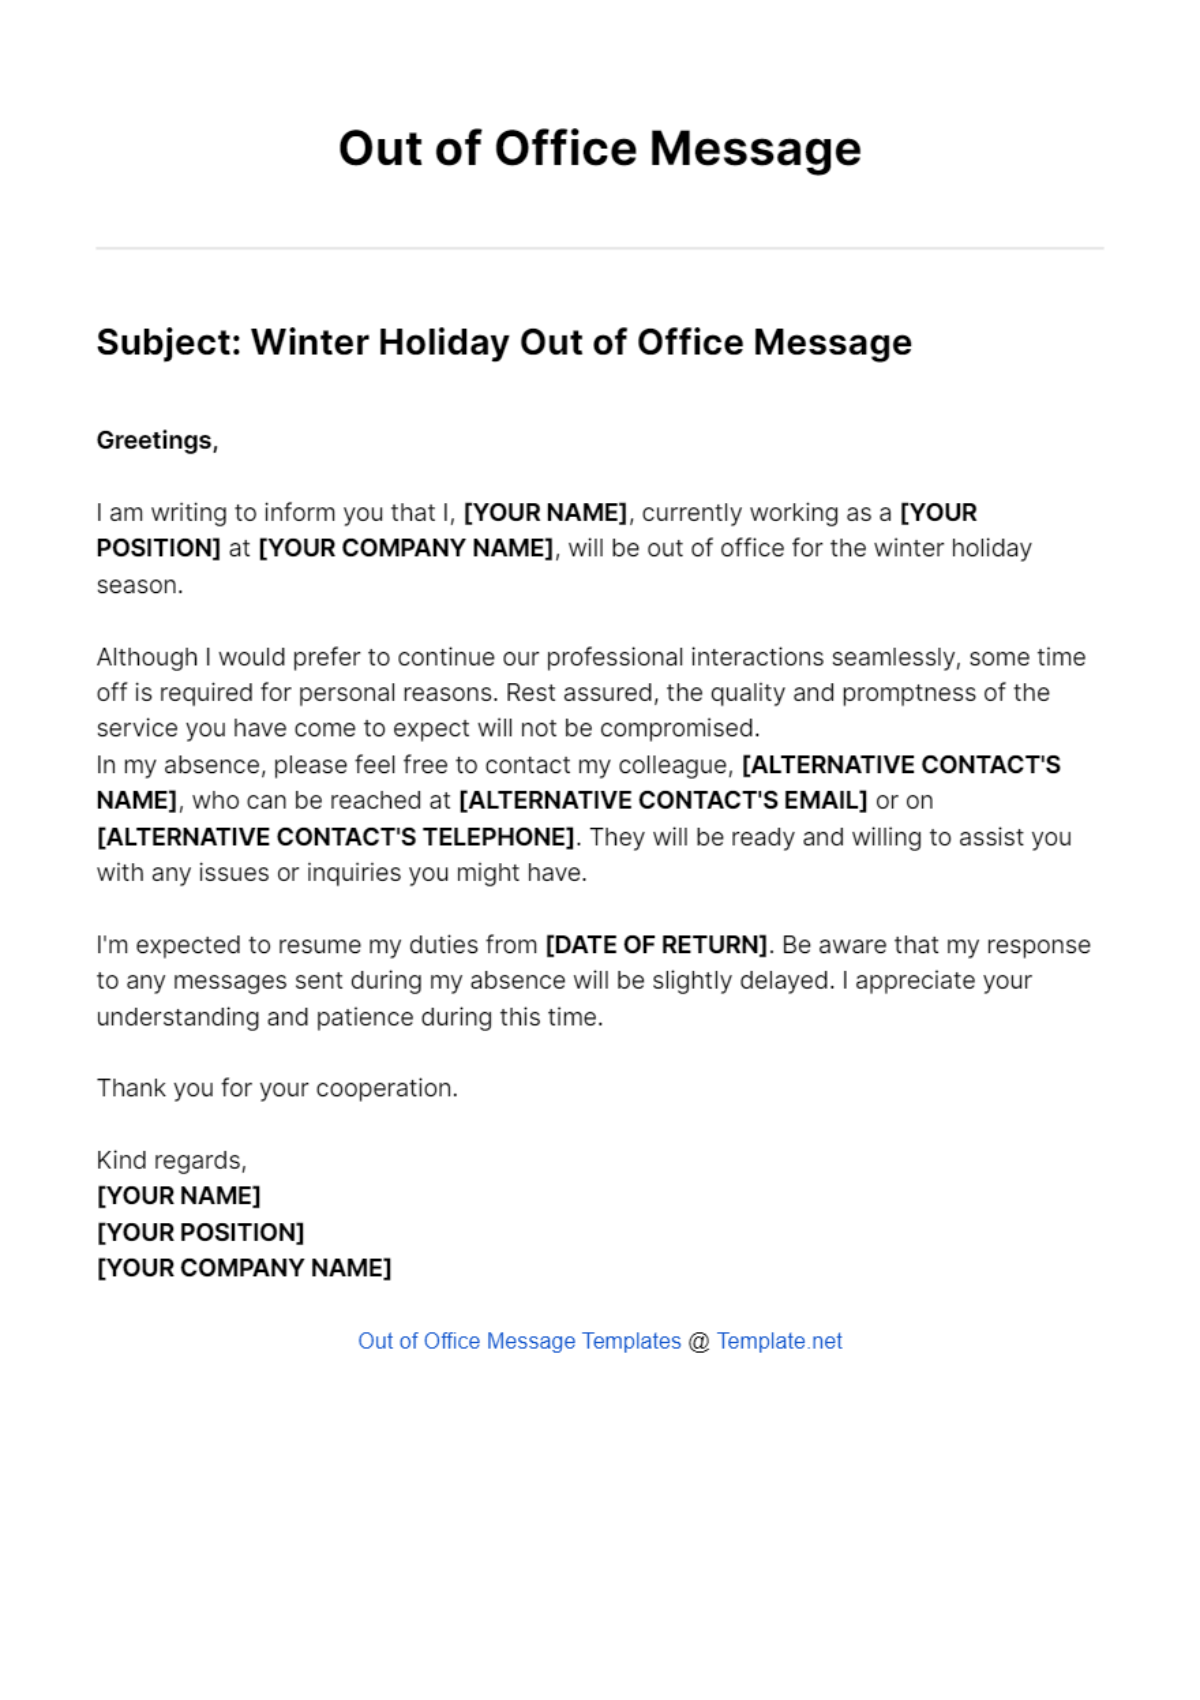 Out Of Office Message Winter Holiday Template